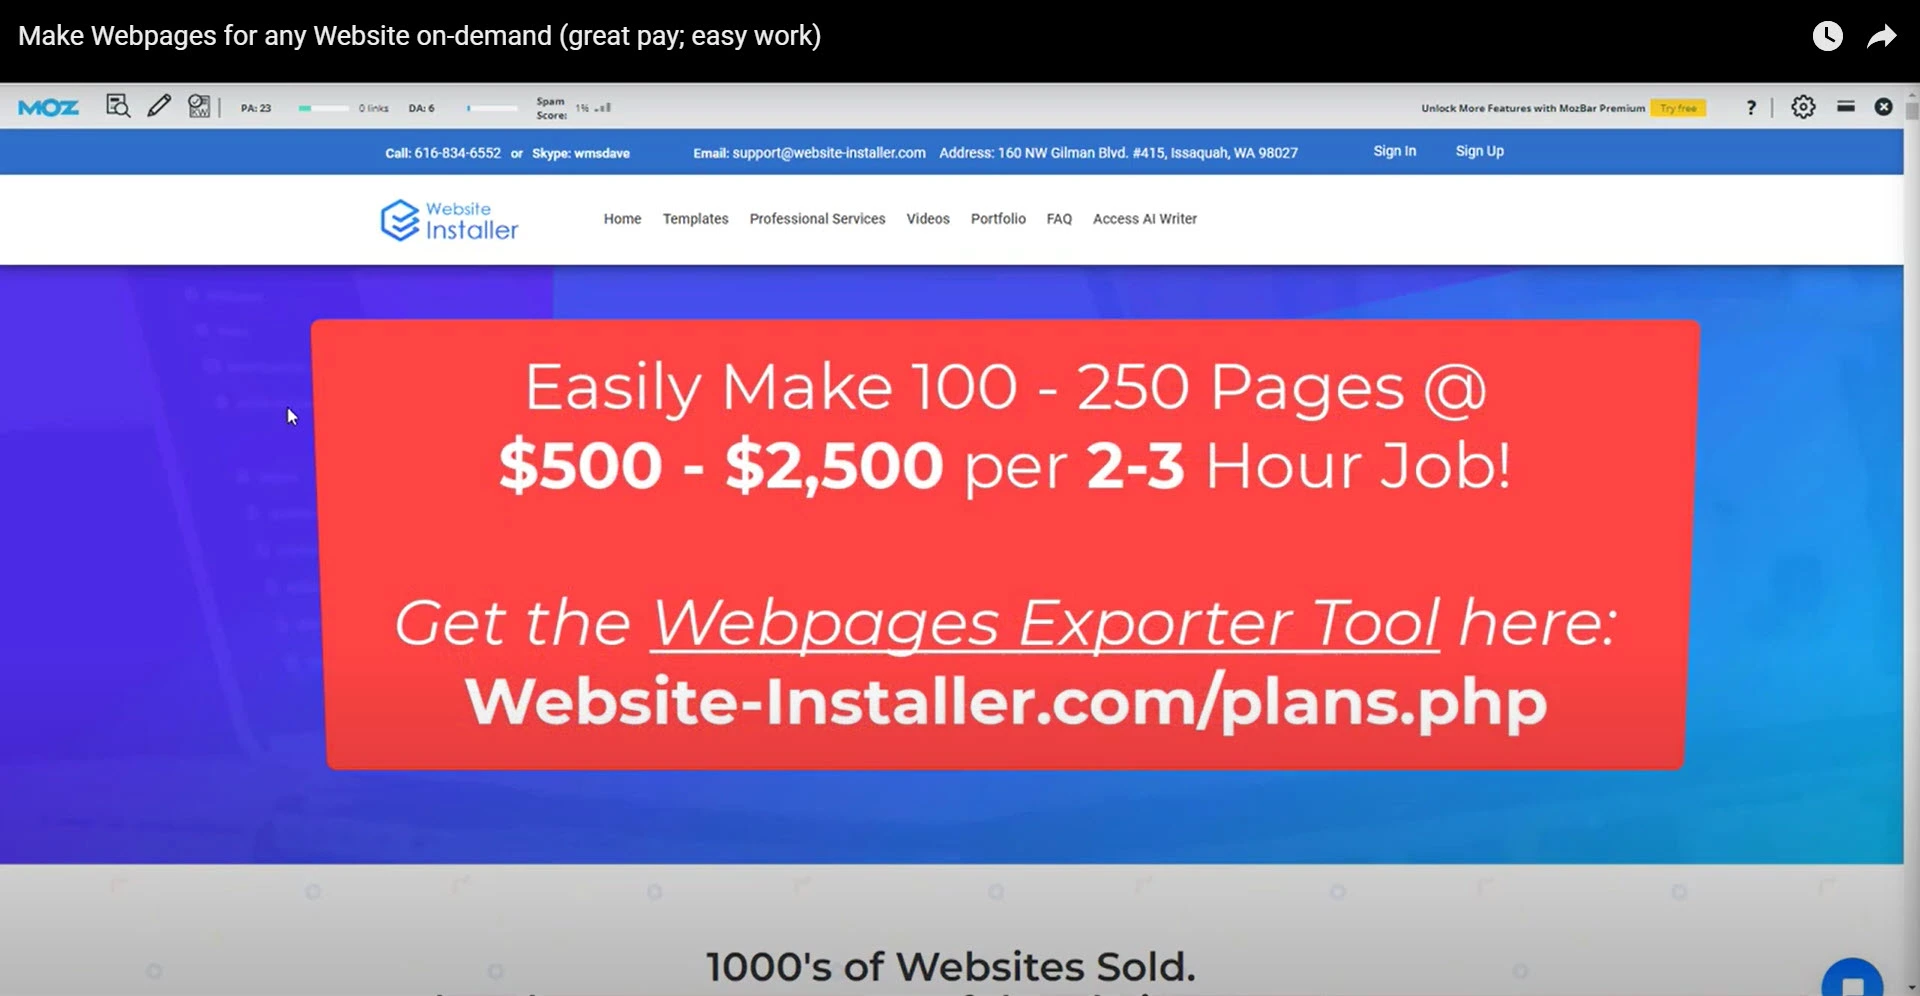 Webpages Exporter Tool: Quick Intro